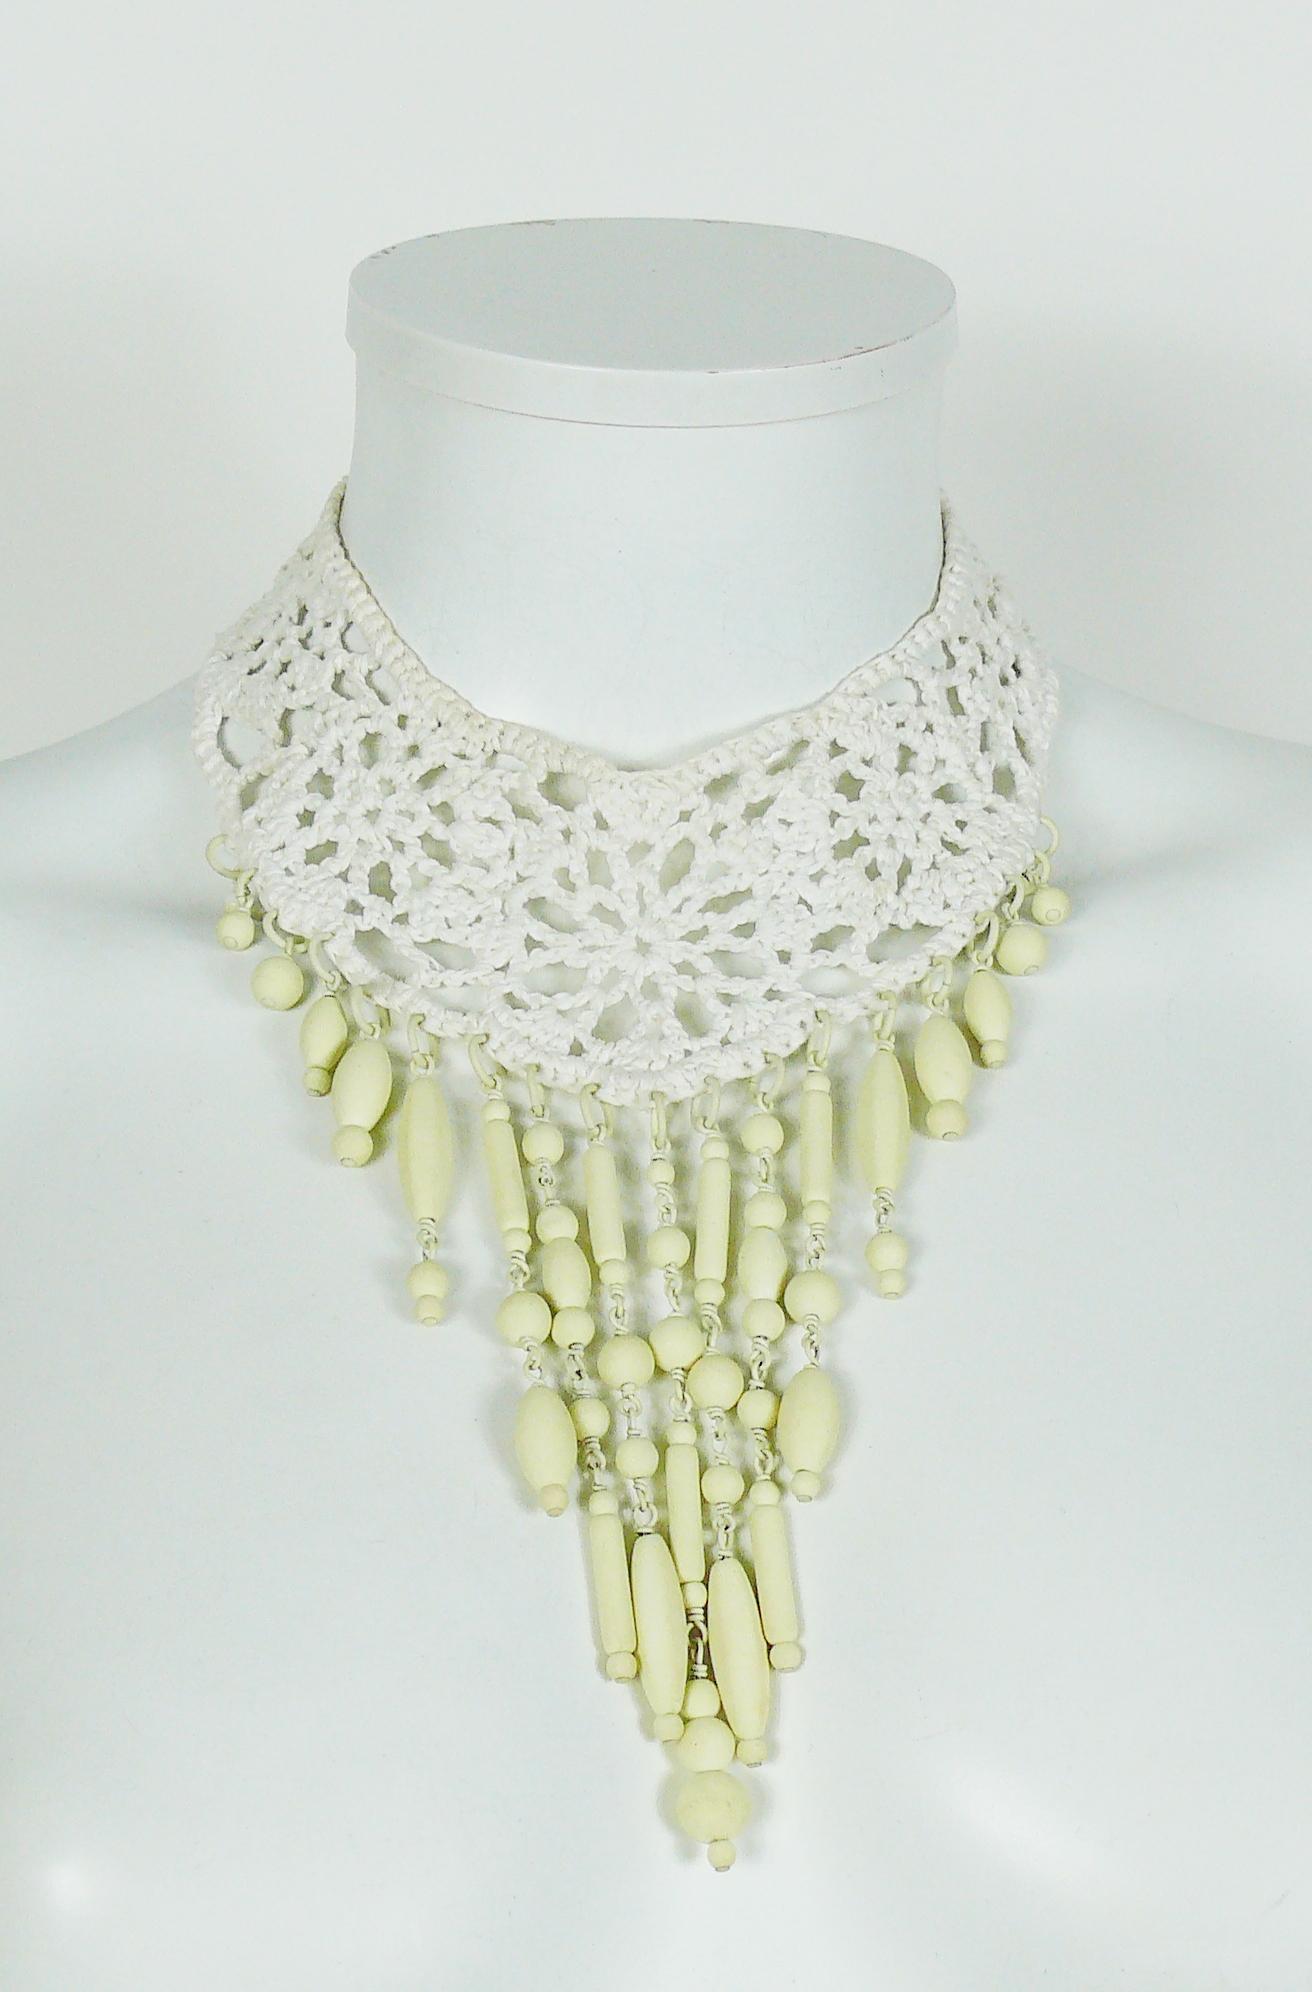 JEAN PAUL GAULTIER  gorgeous white crochet choker necklace embellished with an off white bead cascade.

Double-prong fastener

Marked JEAN PAUL GAULTIER.

JEWELRY CONDITION CHART
- New or never worn : item is in pristine condition with no noticeable